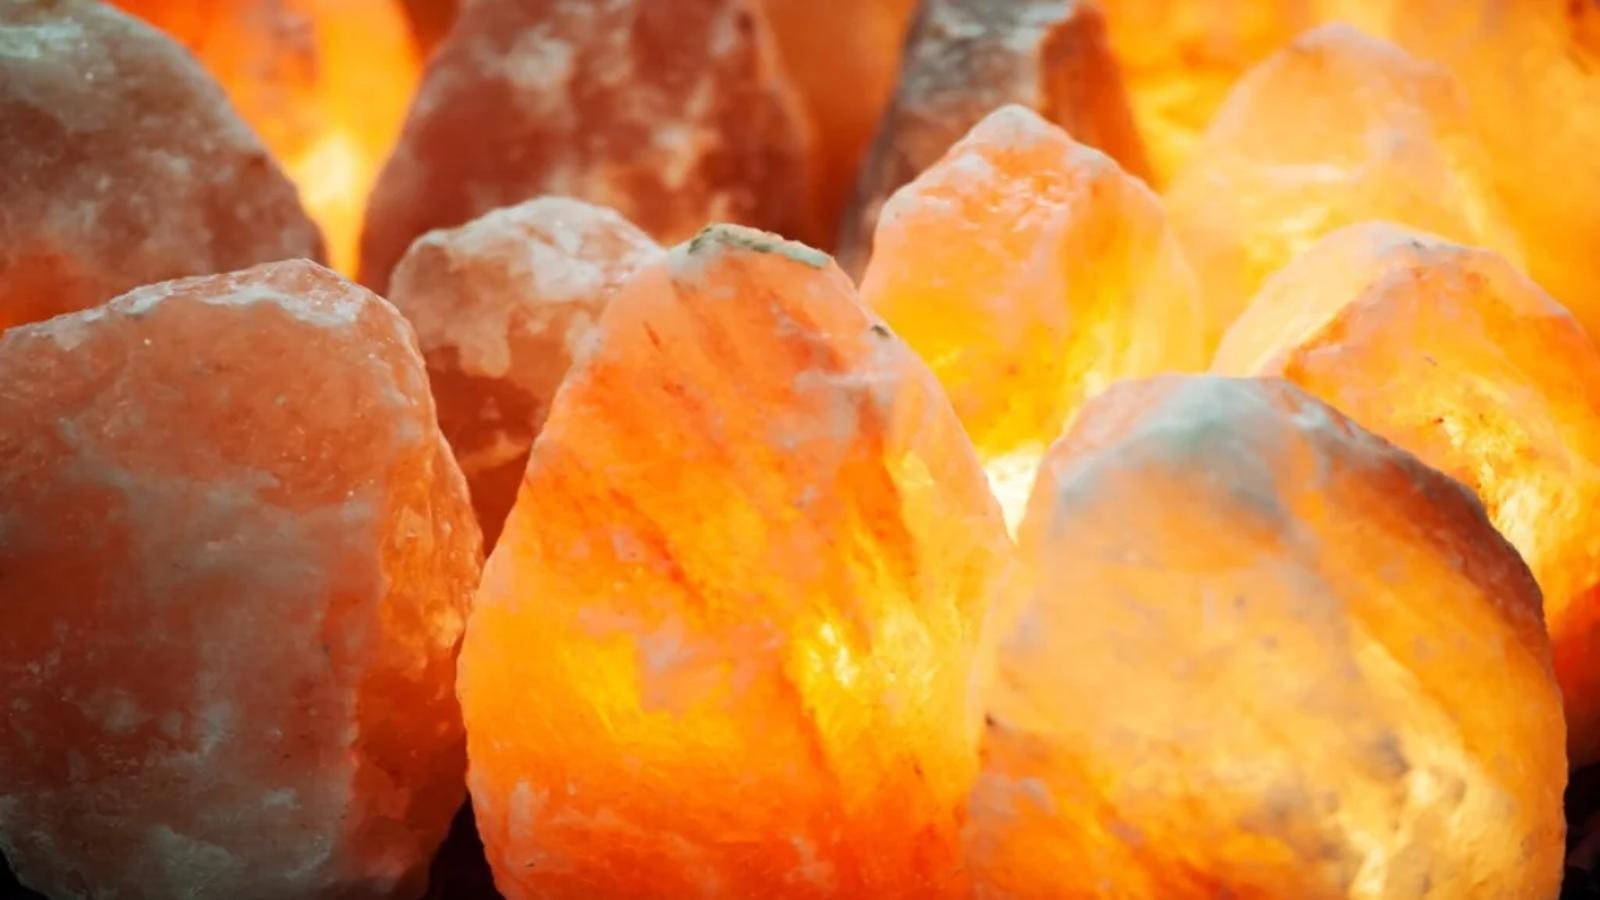 Yummy-Doctor-Holistic-Health-Education-Blog-How-To-Use-Himalayan-Salt-Lamps-For-Better-Air-Sleep-And-Mental-Clarity